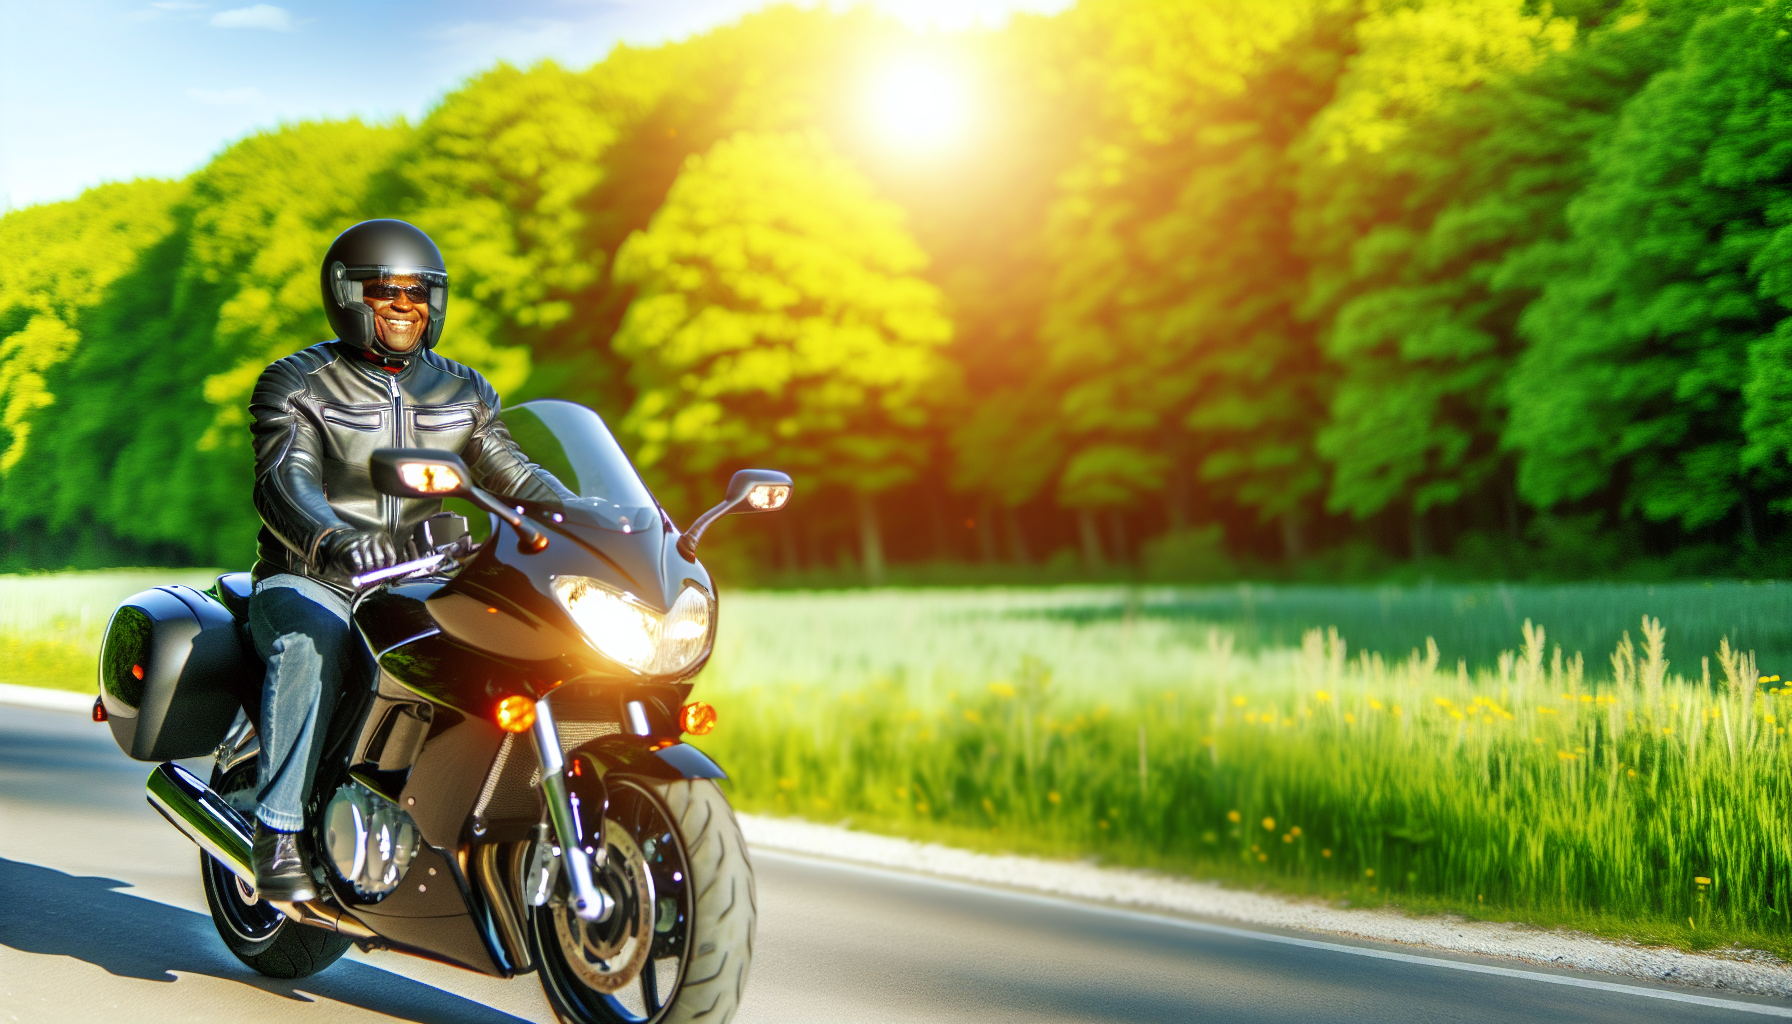 Benefits of motorcycle warranty including peace of mind